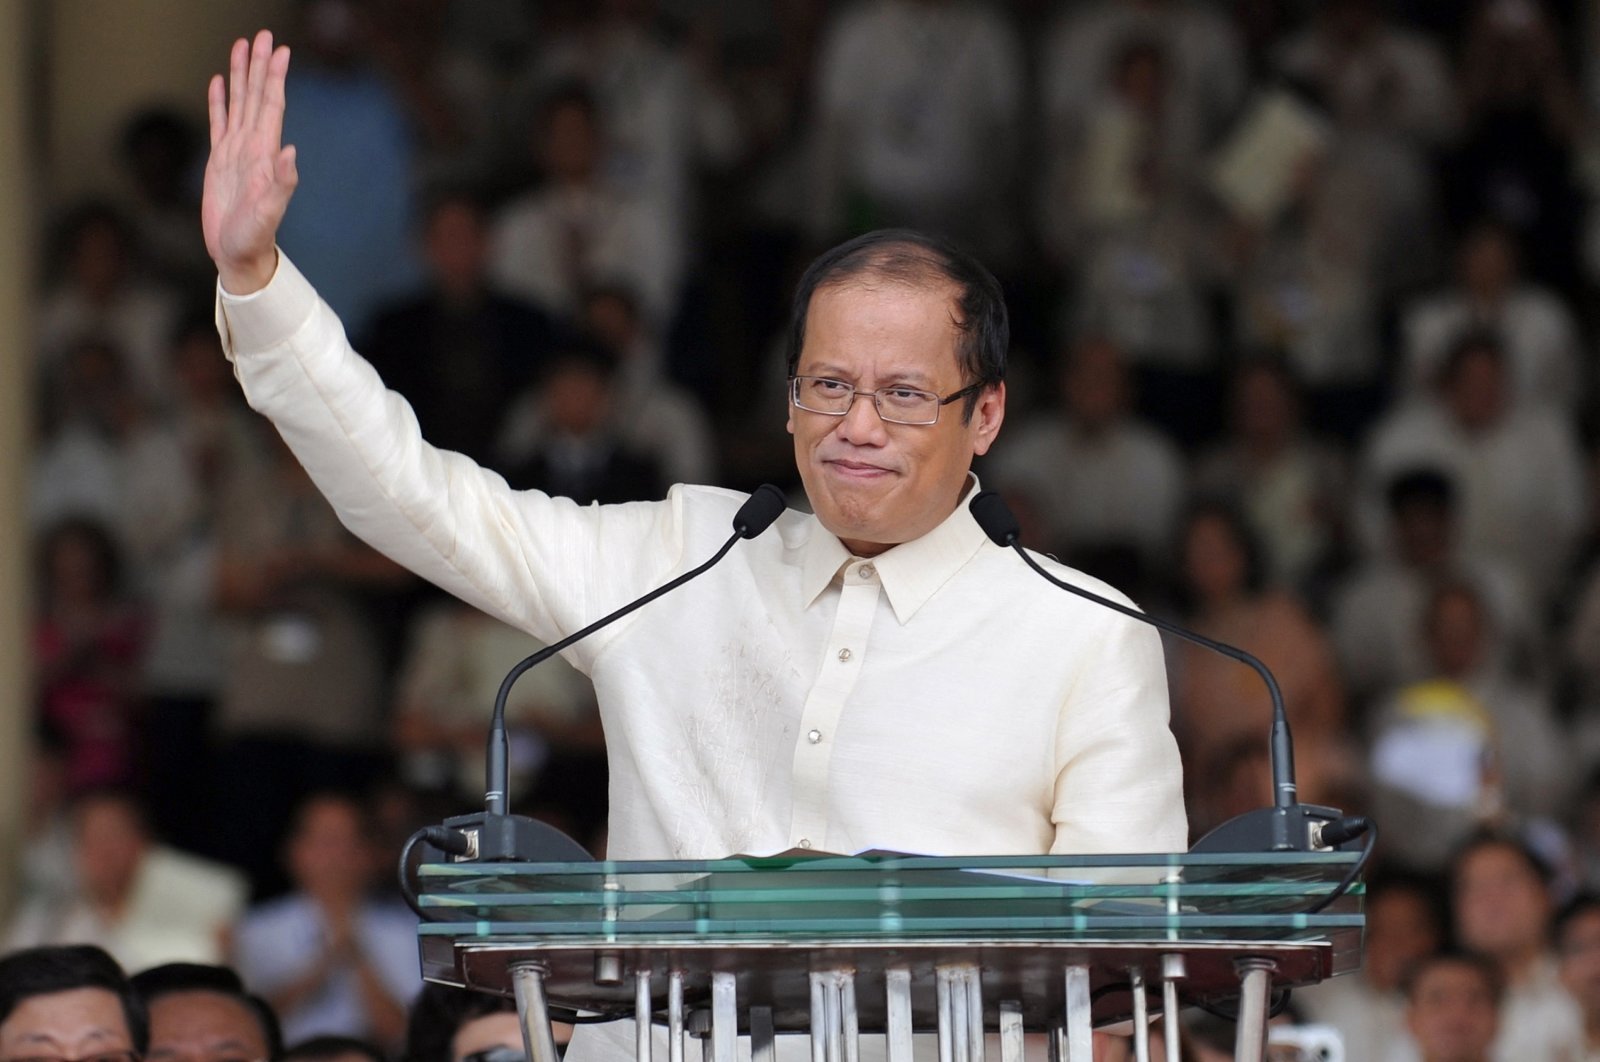 This file photo taken on June 30, 2010, shows Philippine President Benigno Aquino waving to the crowd after delivering his inaugural speech at the Quirino Grandstand in Manila, Philippines. (AFP Photo)